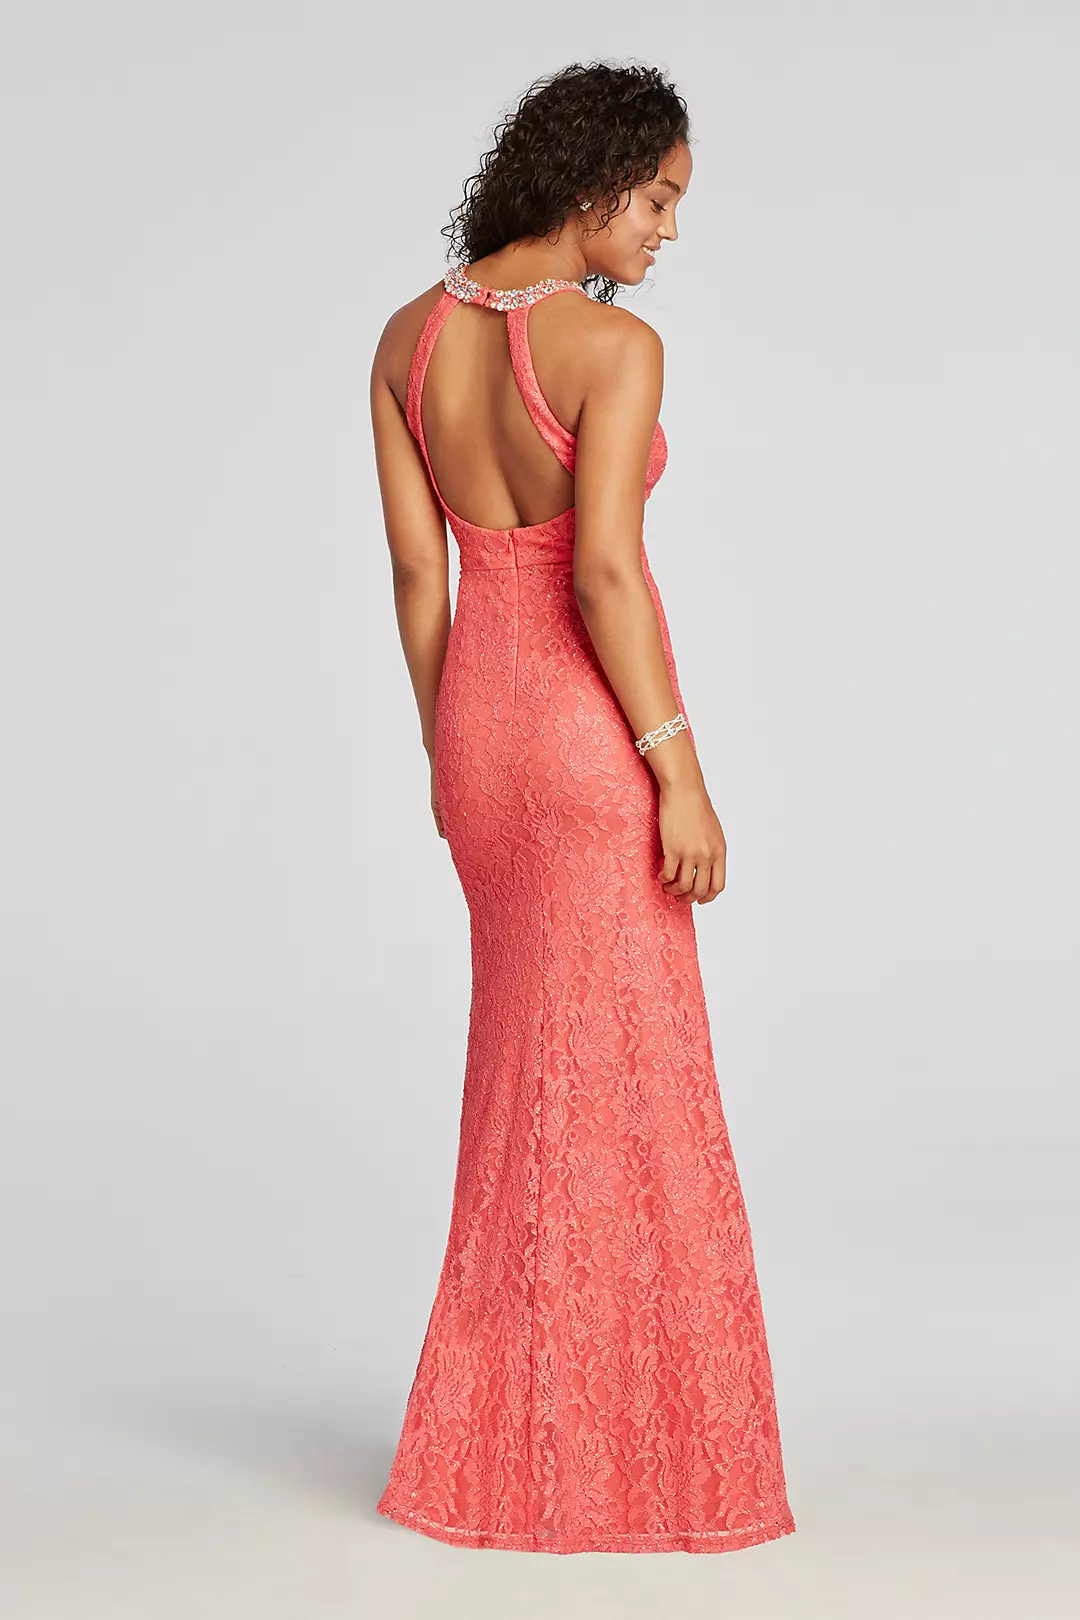 Halter Lace Prom Dress with Beaded Neckline Image 2